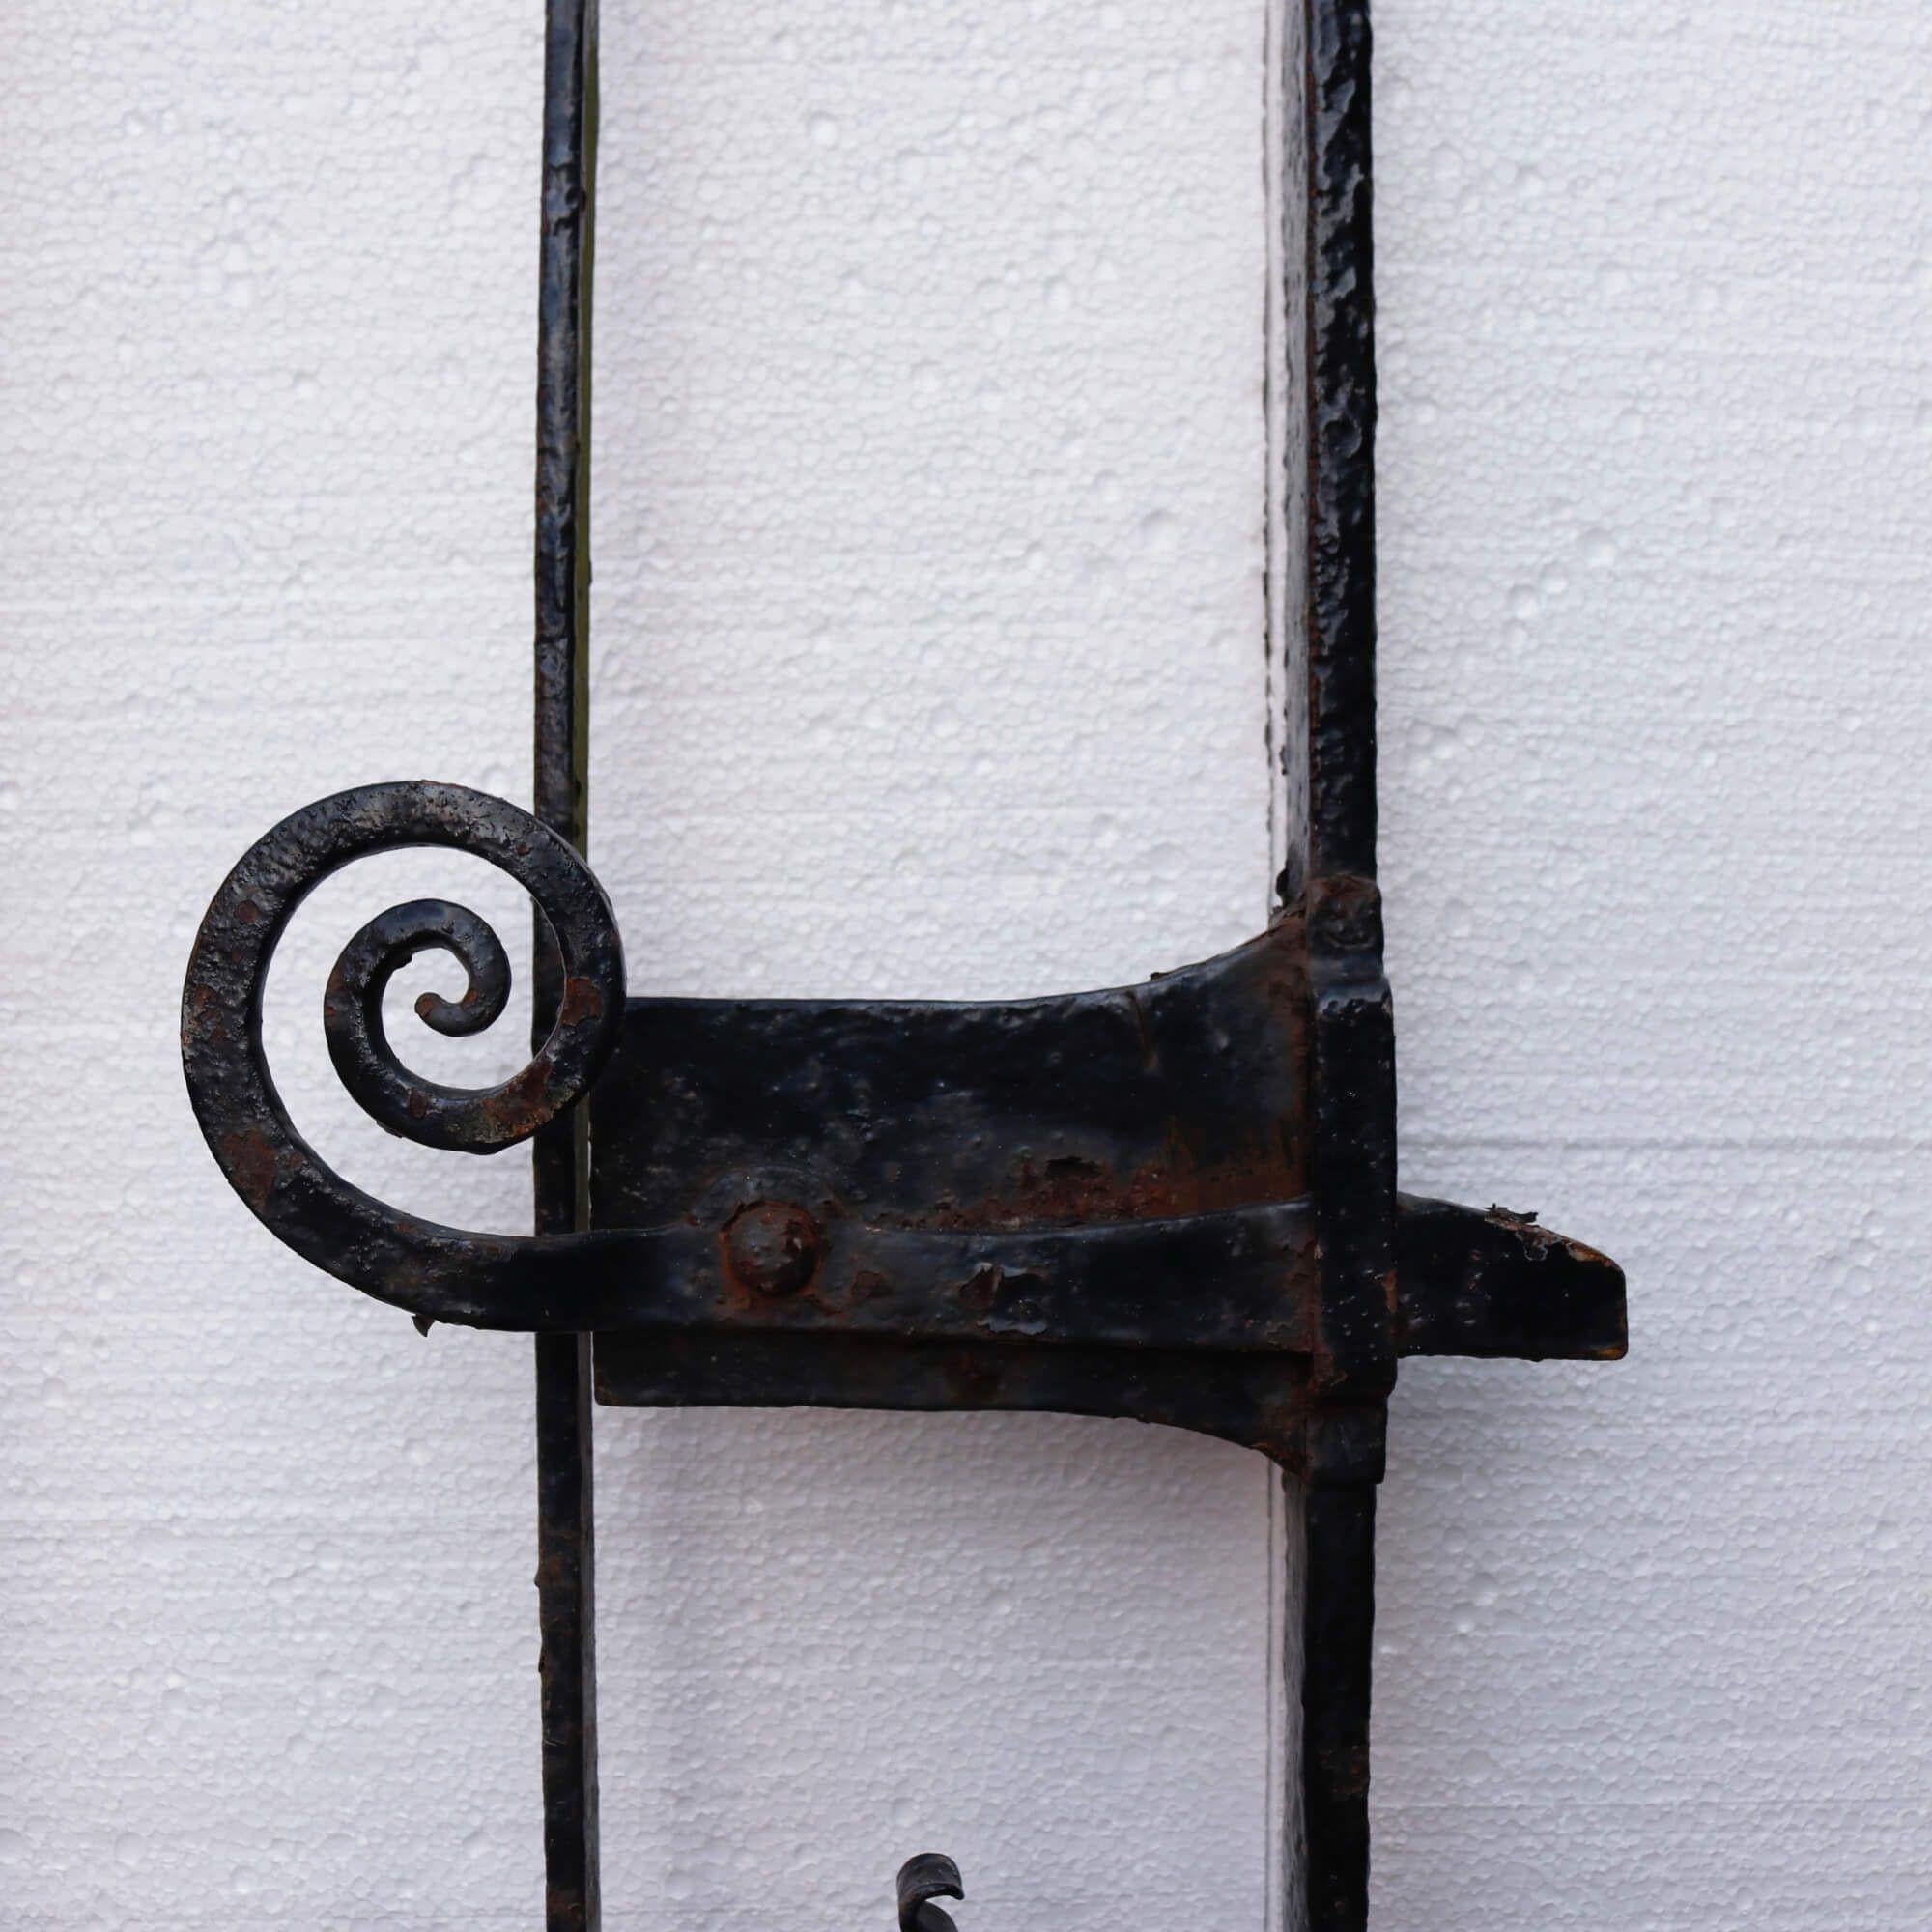 19th Century Georgian Wrought Iron Pedestrian Gate In Fair Condition For Sale In Wormelow, Herefordshire